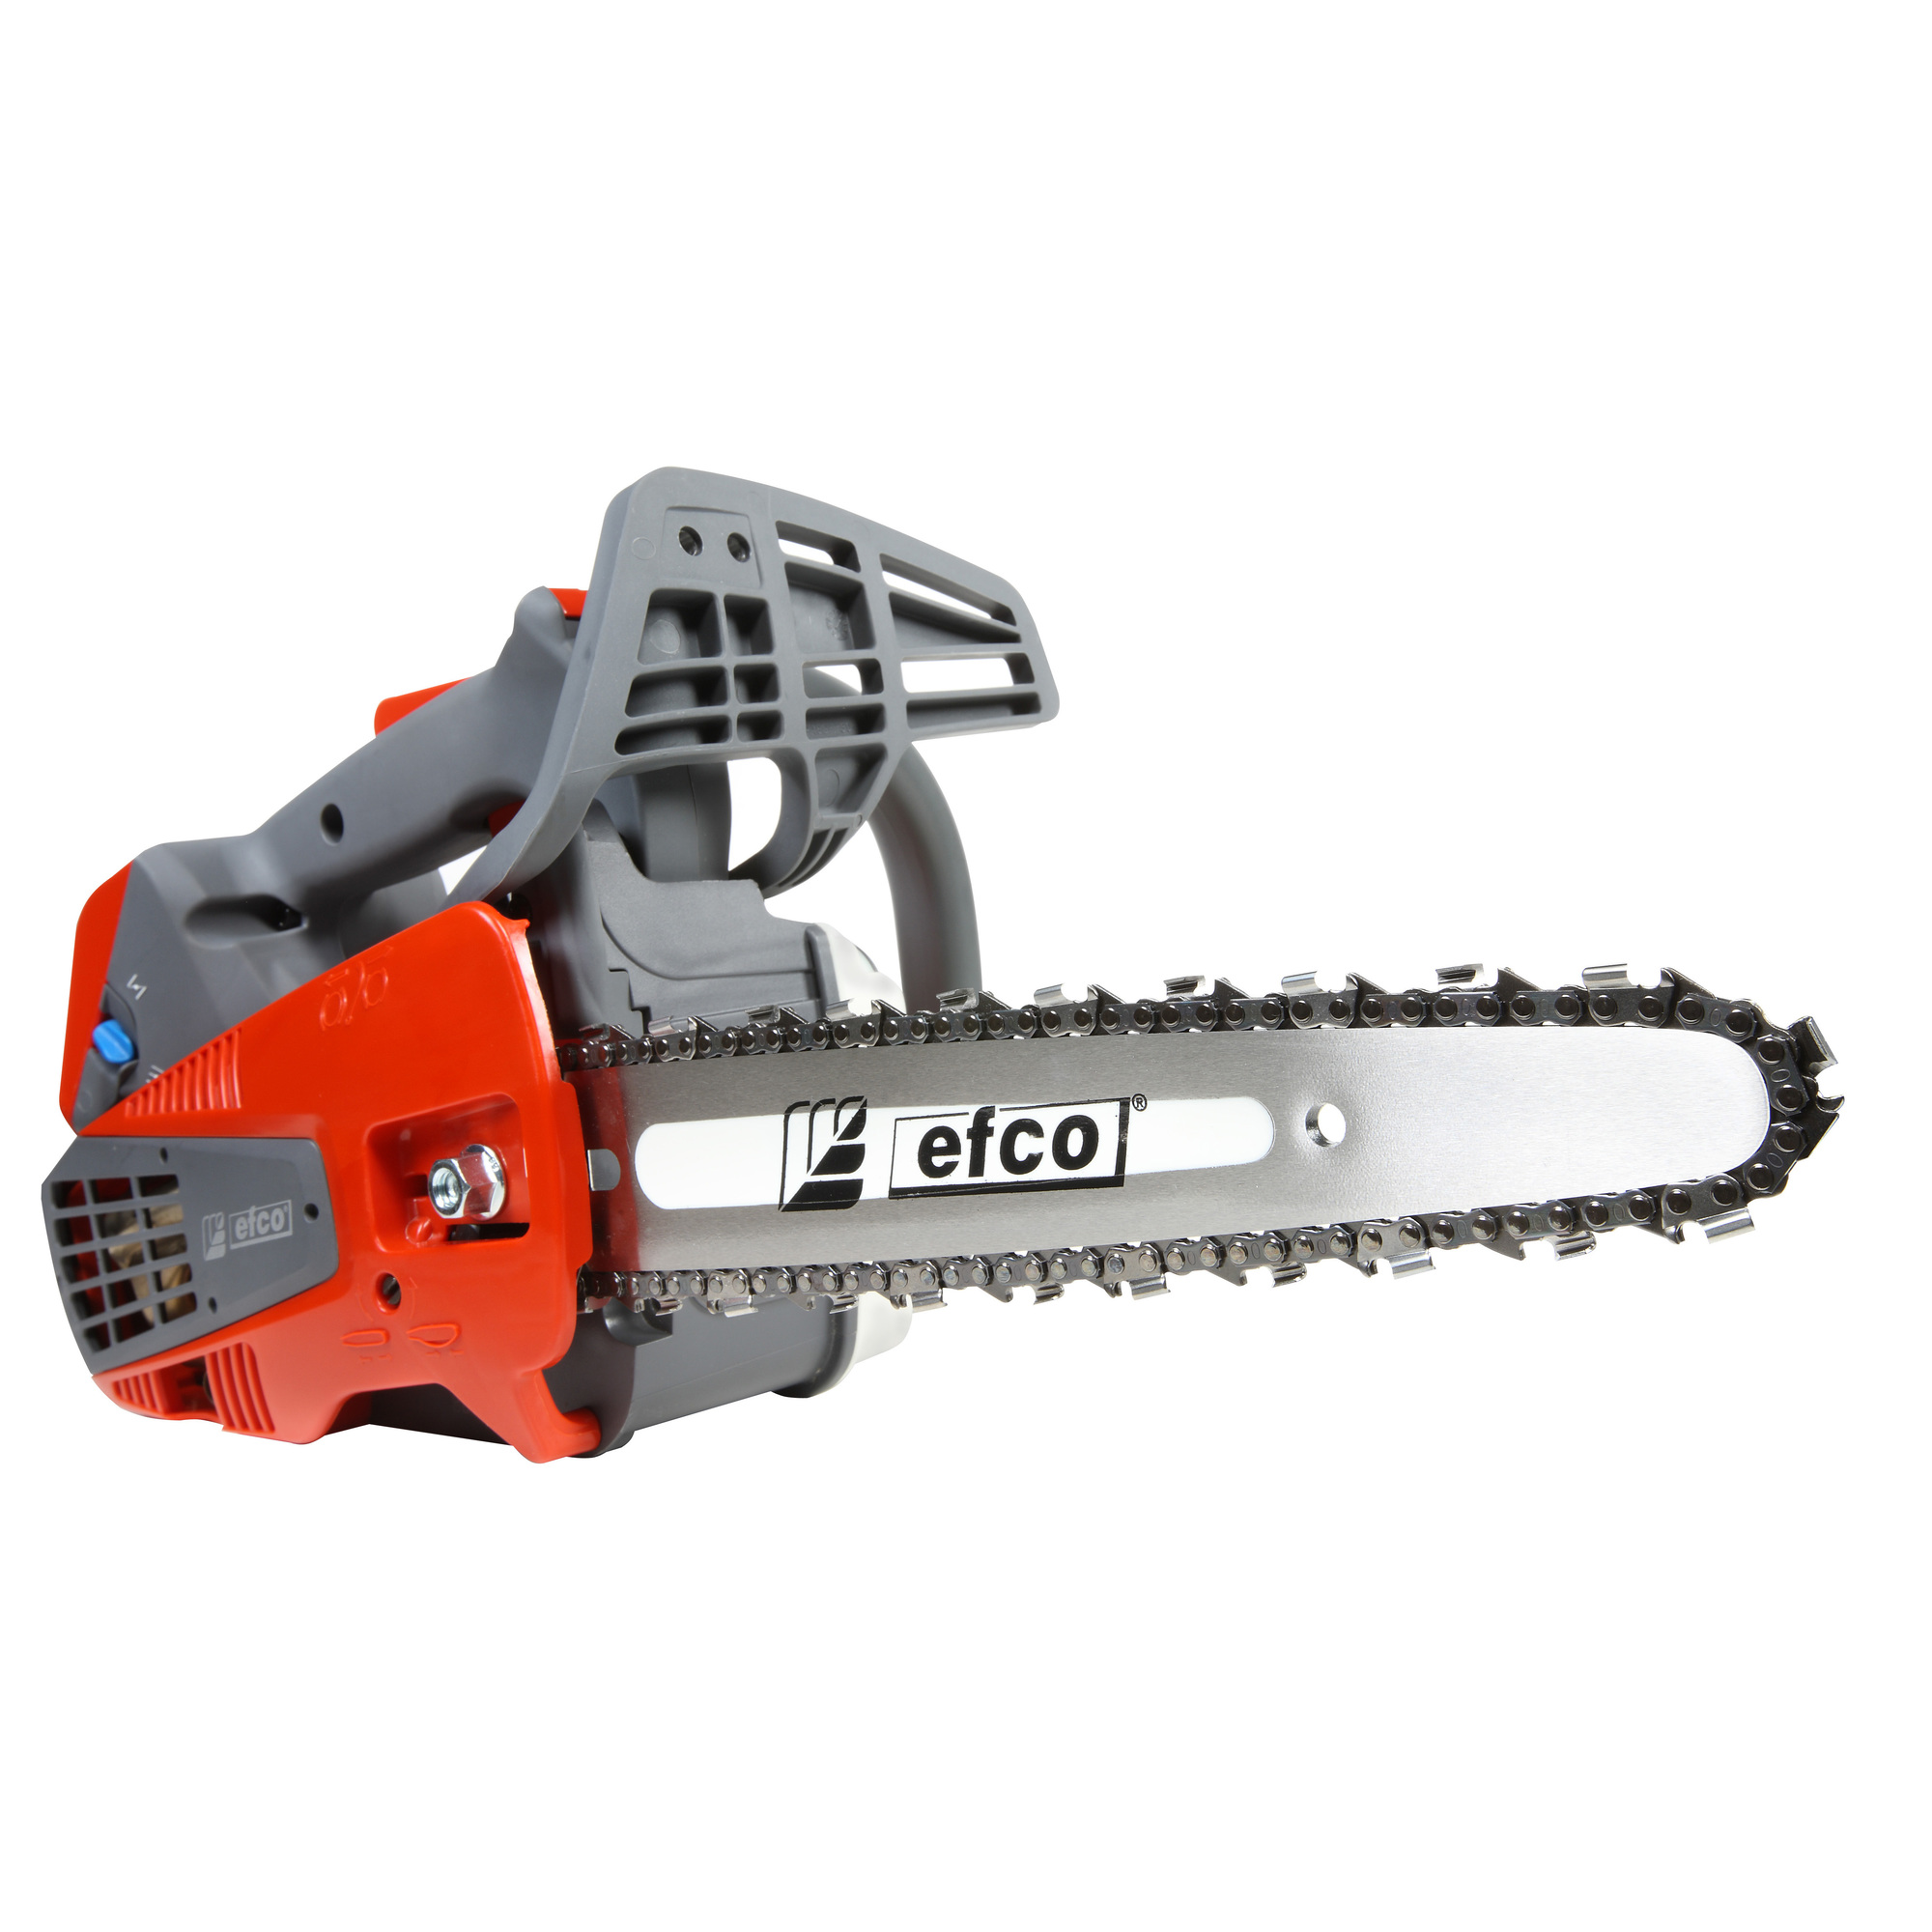 Efco, Professional Top Handle Arborist Chainsaw, Bar Length 12 in, Engine Displacement 25.4 cc, Model MTT2500-12